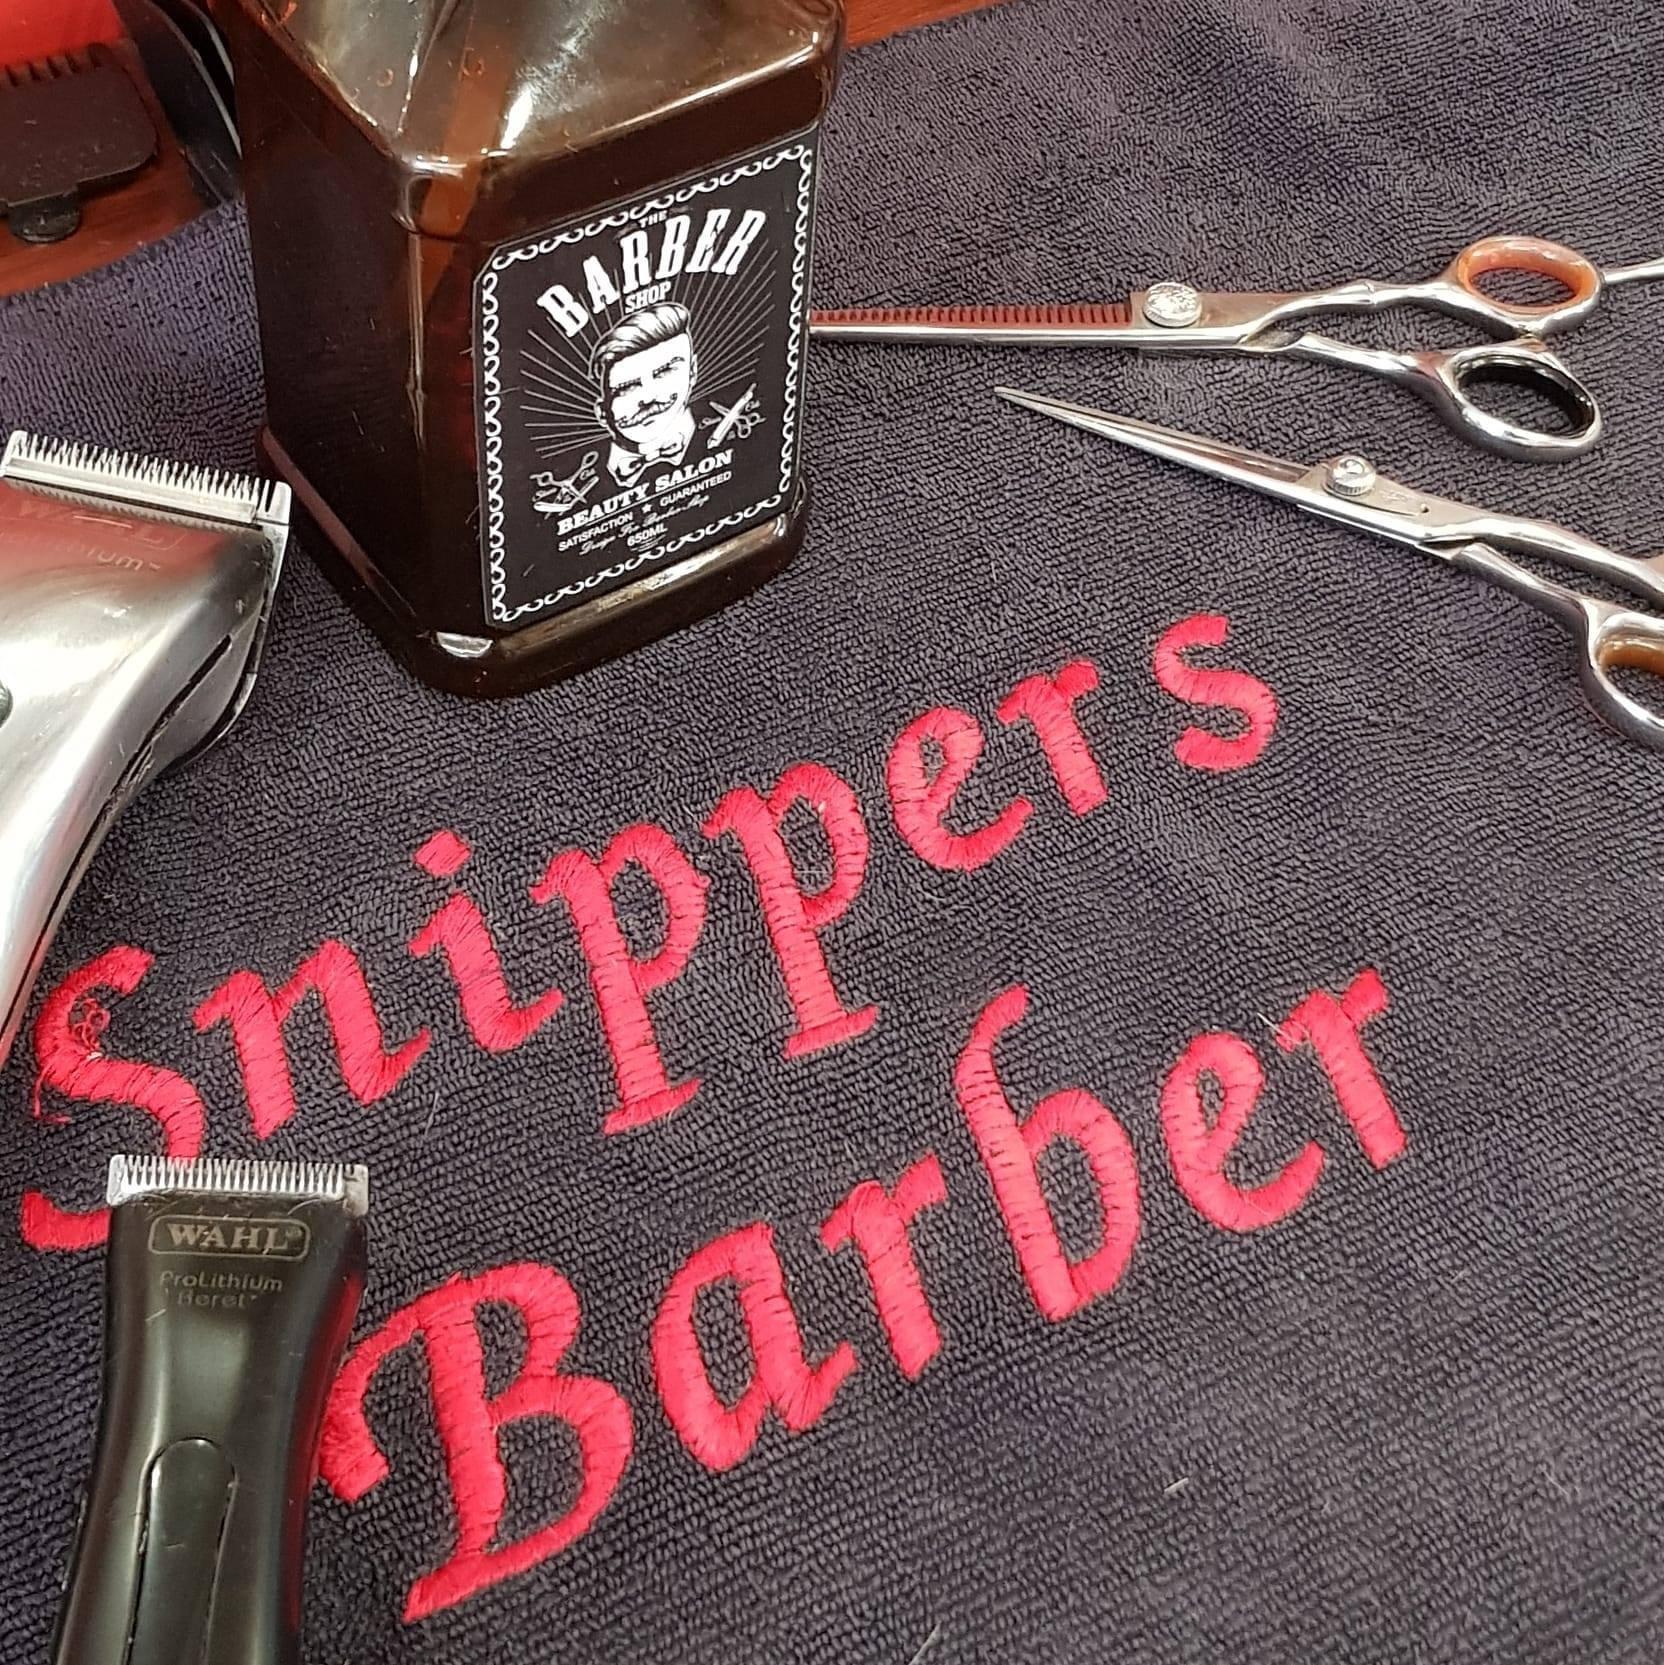 Snippers Barber